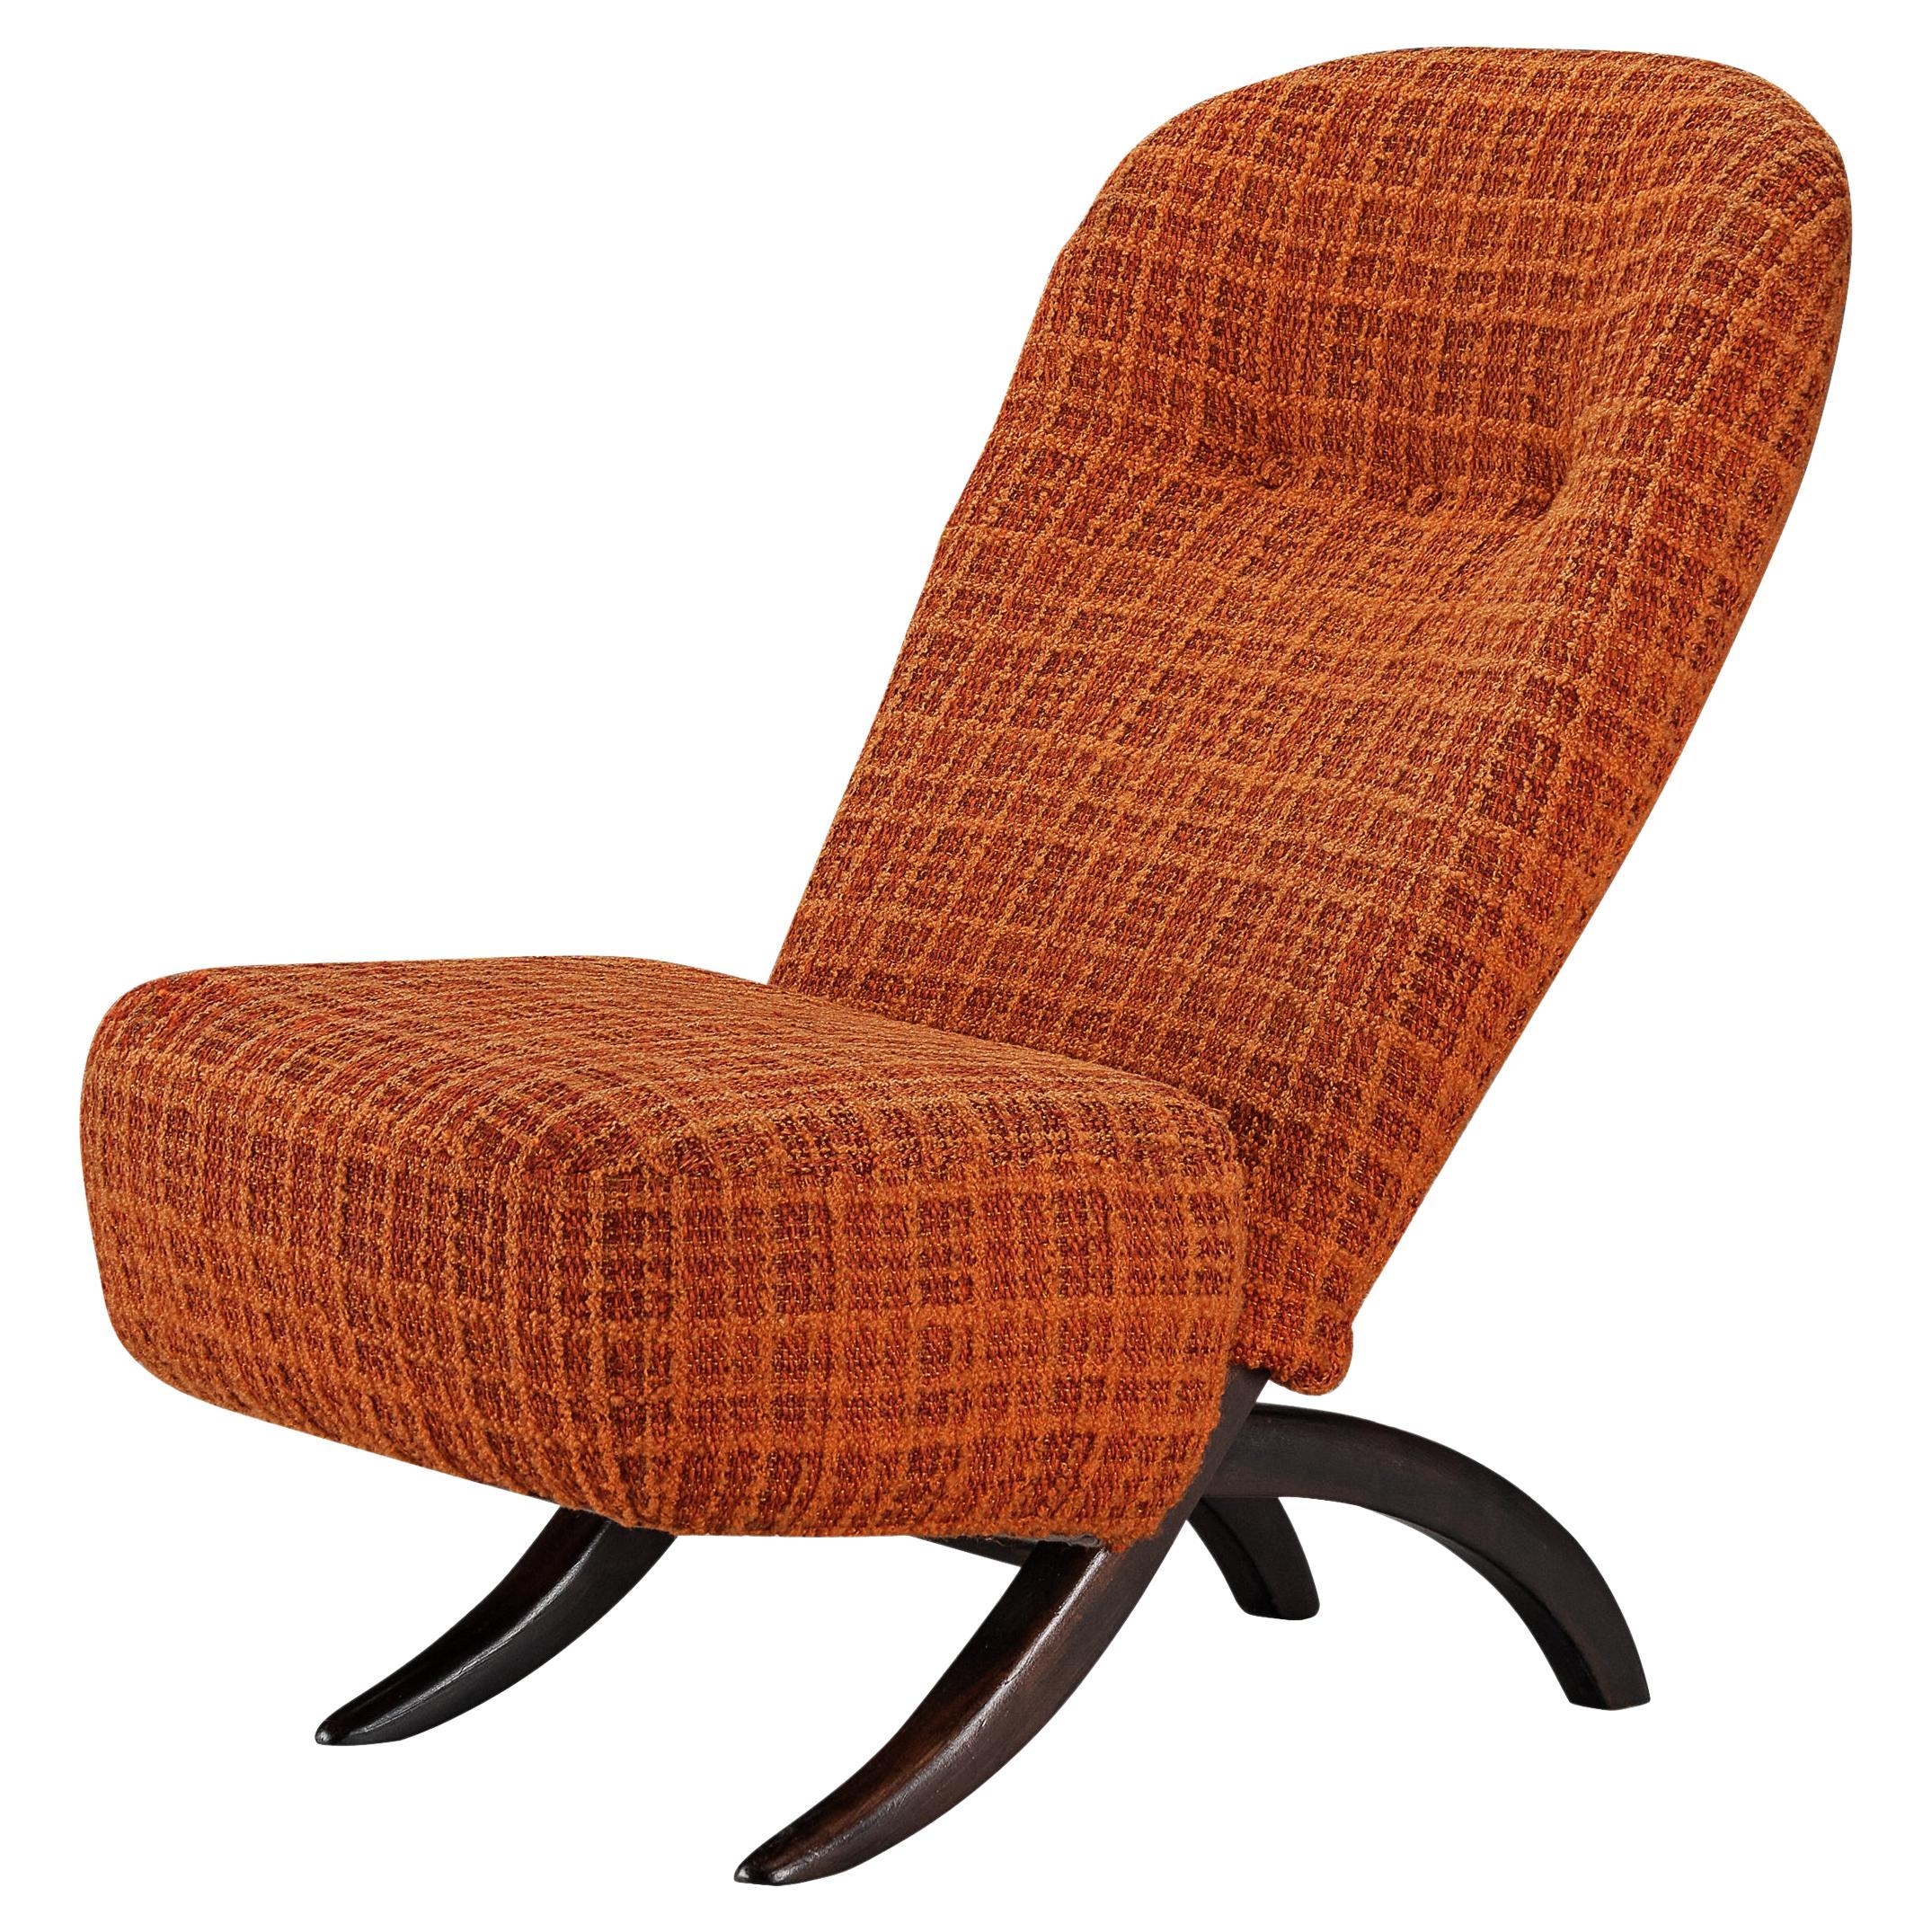 Theo Ruth for Artifort 'Congo' Easy Chair in Ash and Orange Upholstery 